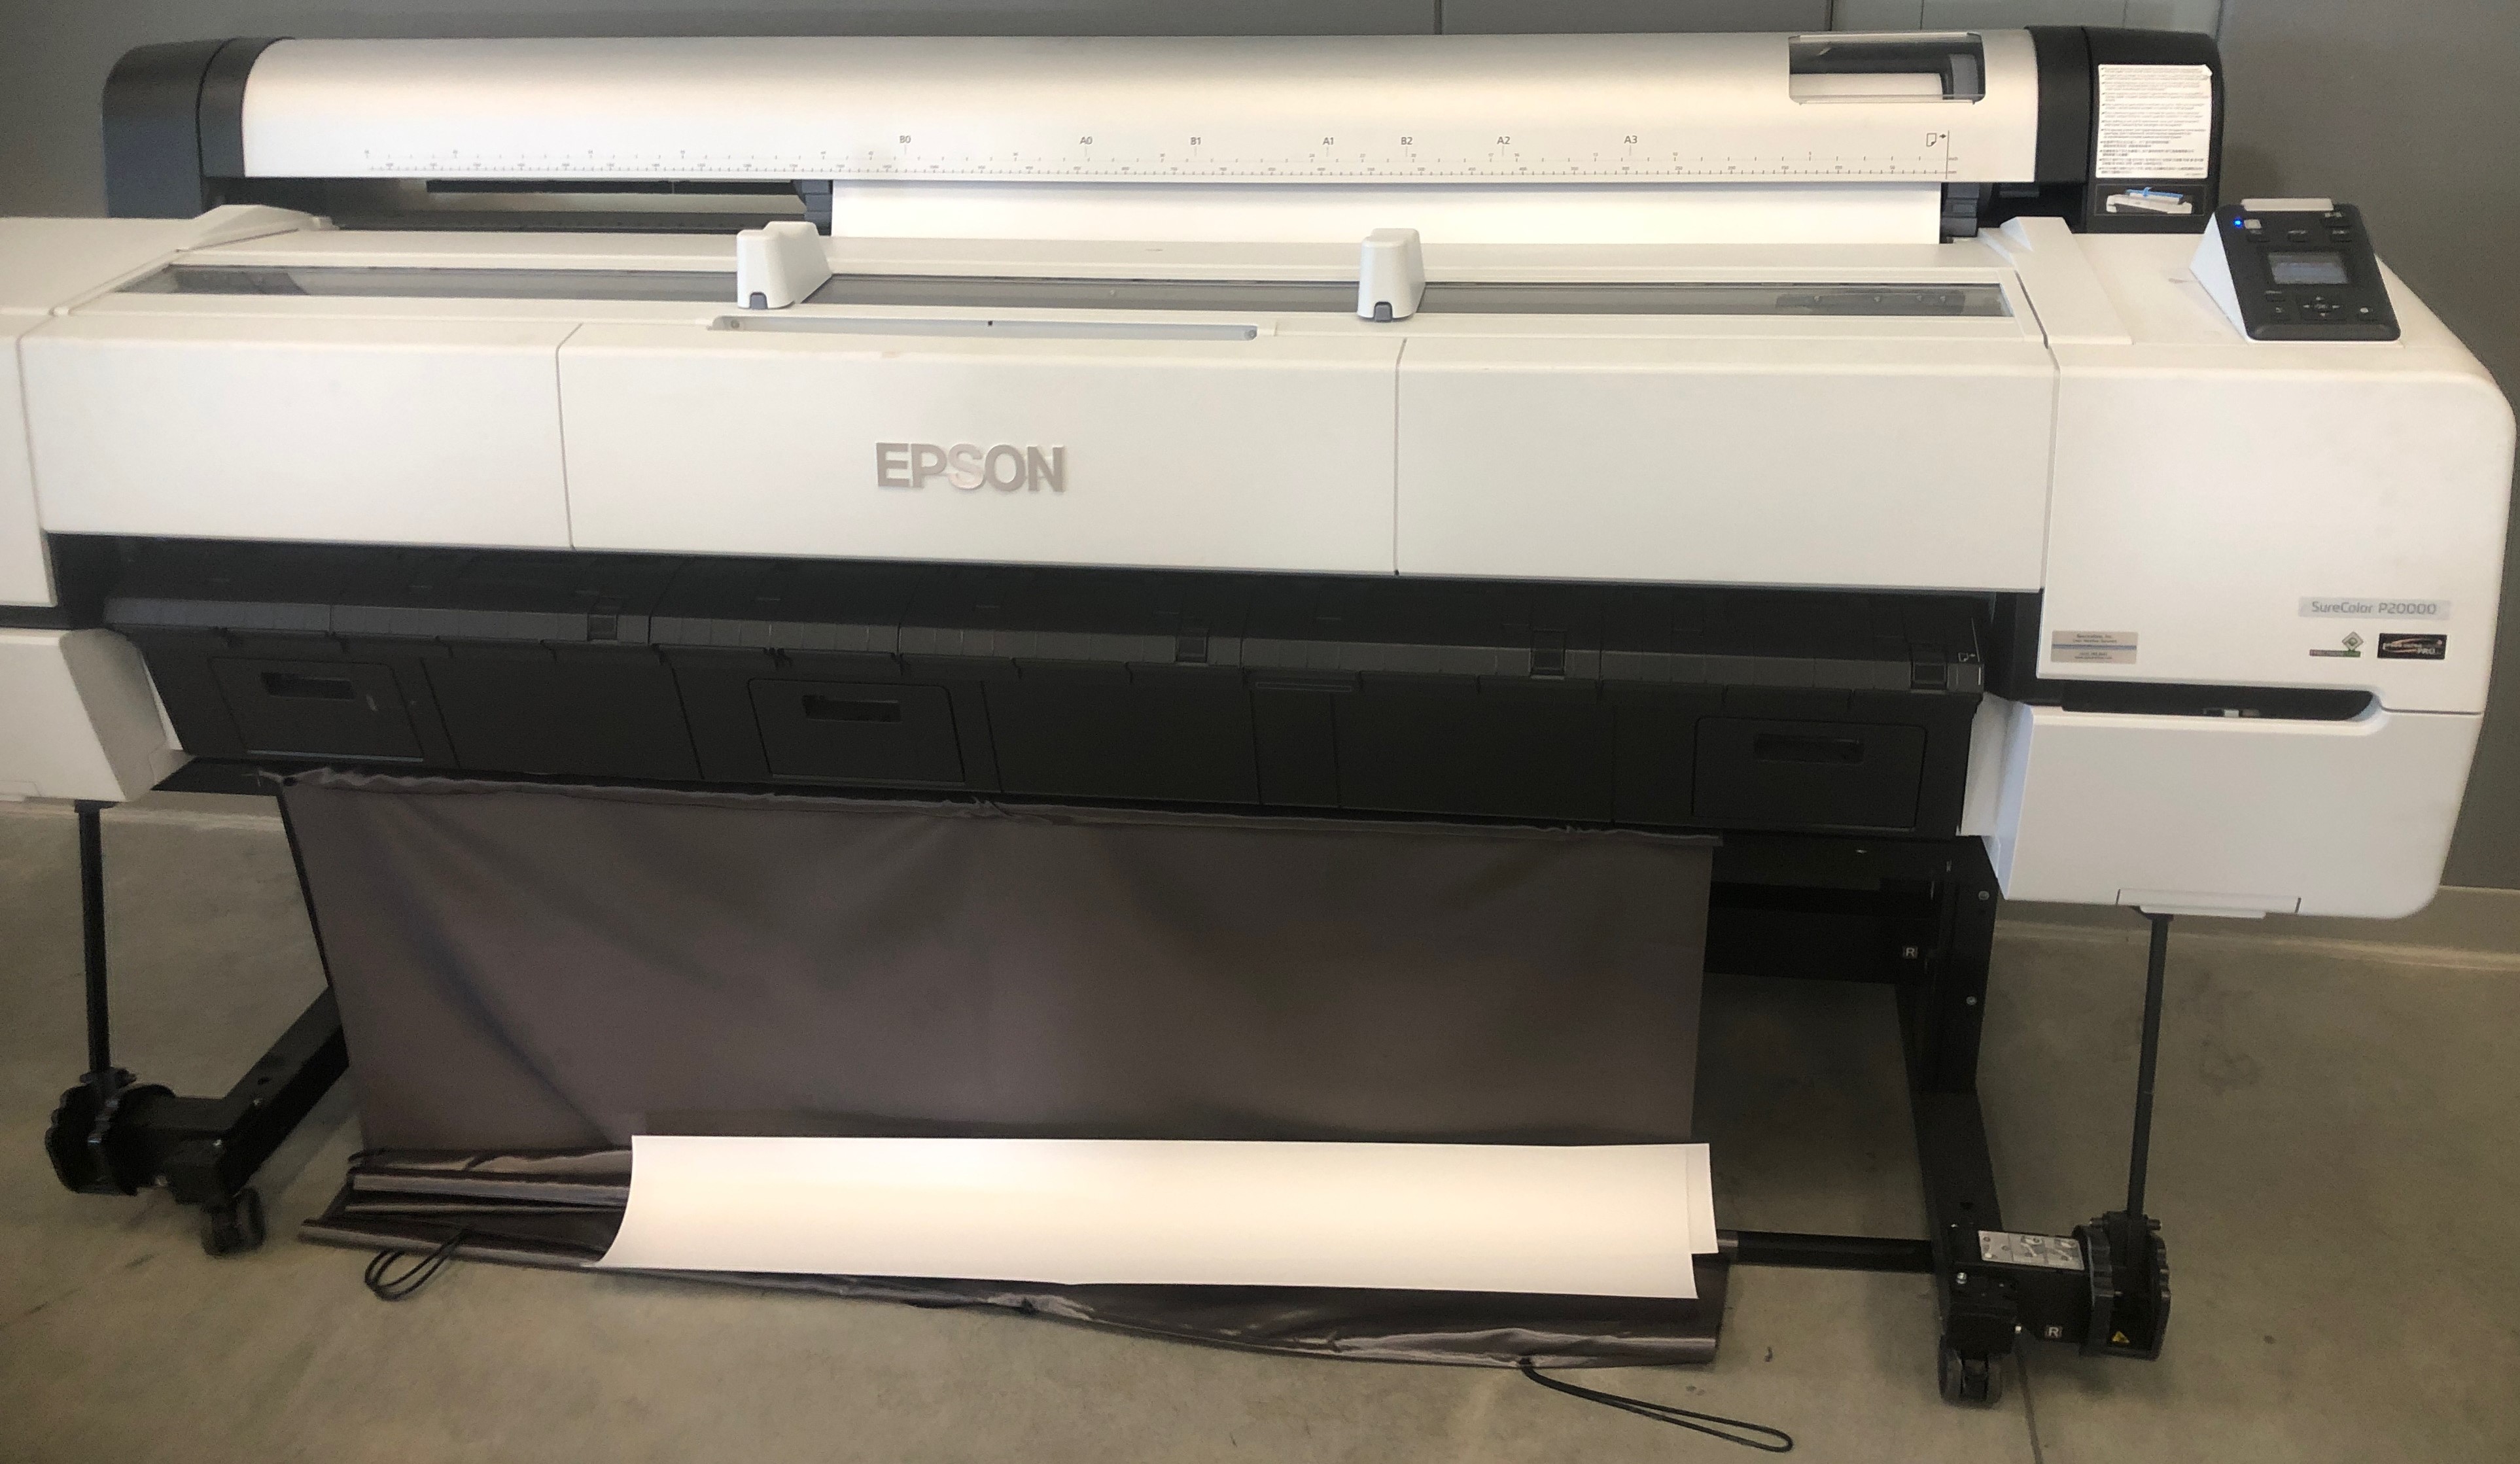 what format does a swf embroidery machine use